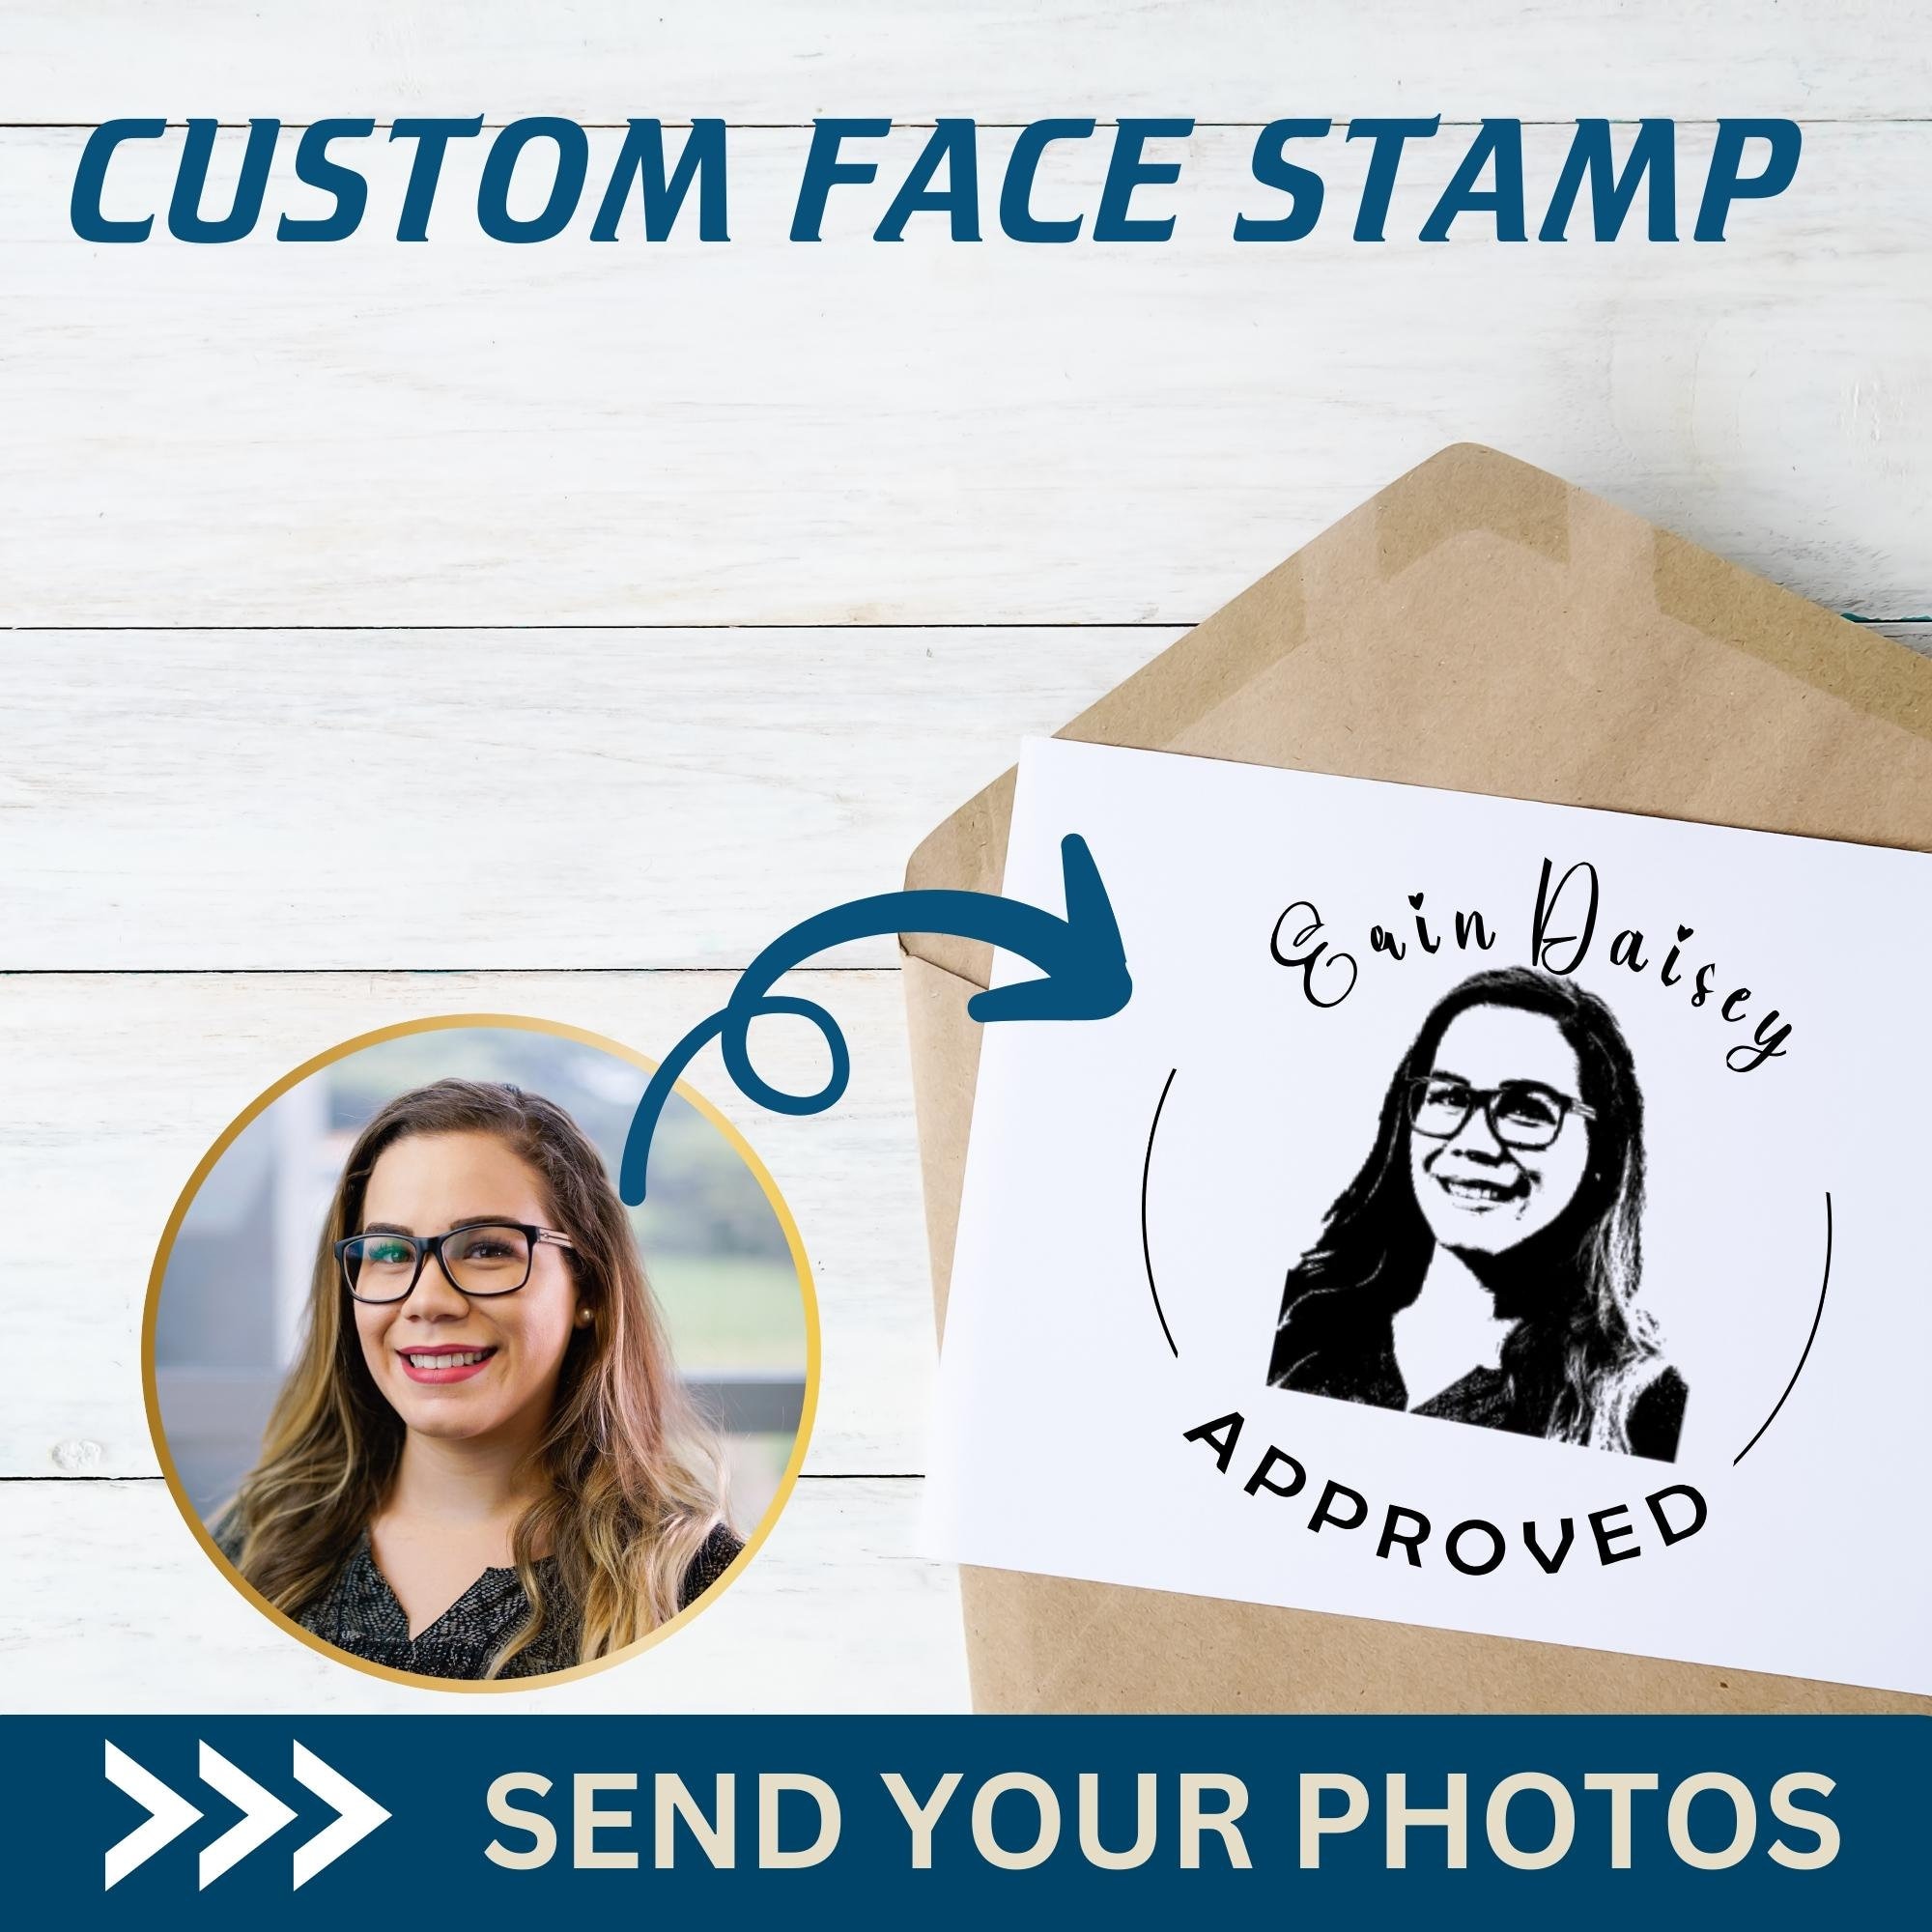  StampBee Small size Custom Stamp - Up to 3 Lines of  Personalized Text, 6 Ink Colors & Many Fonts, Self Inking Business Stamp,  Personal use, Return Address, Labels, Name, Office